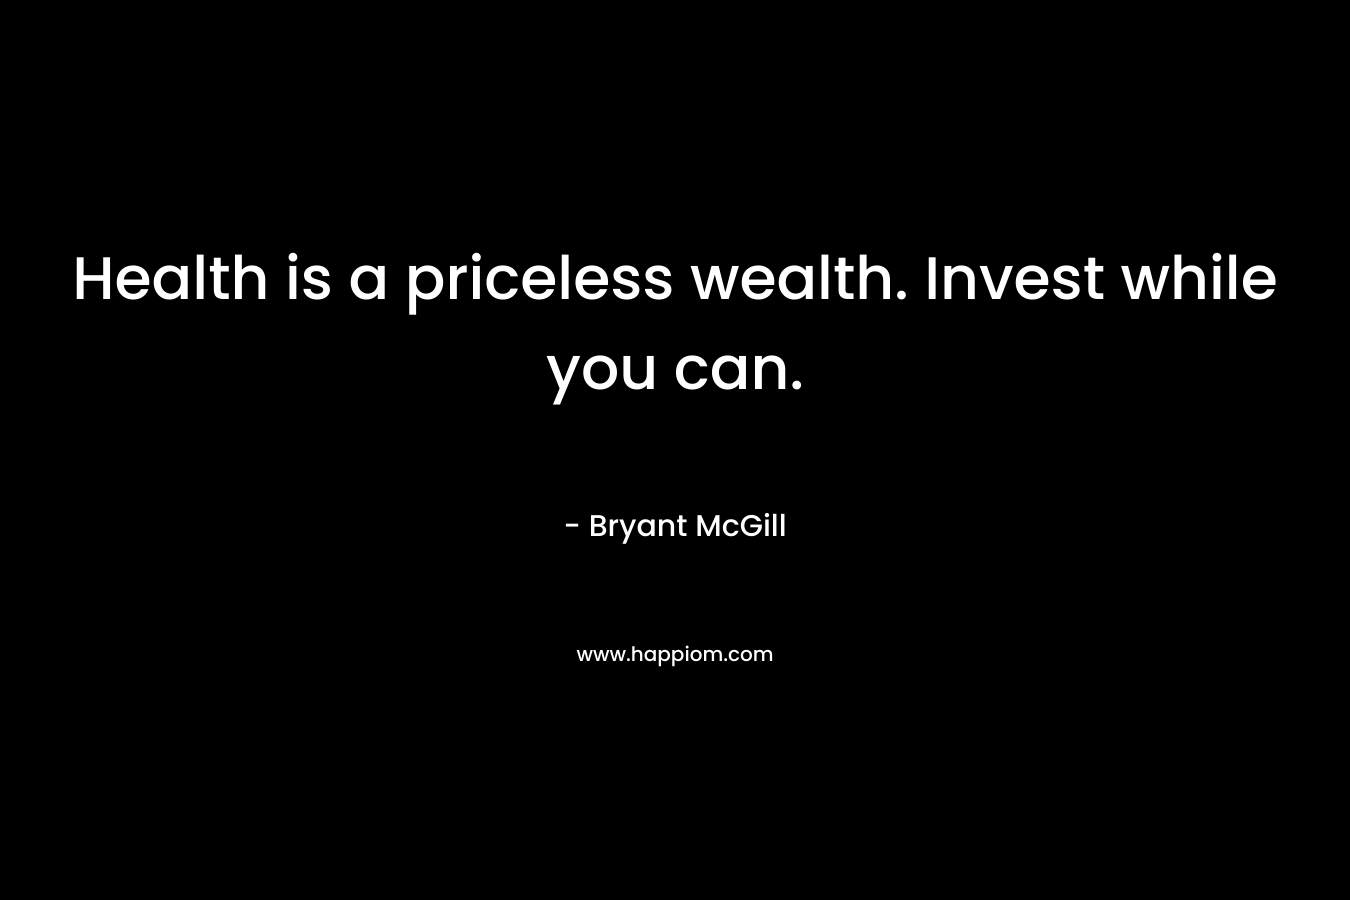 Health is a priceless wealth. Invest while you can.